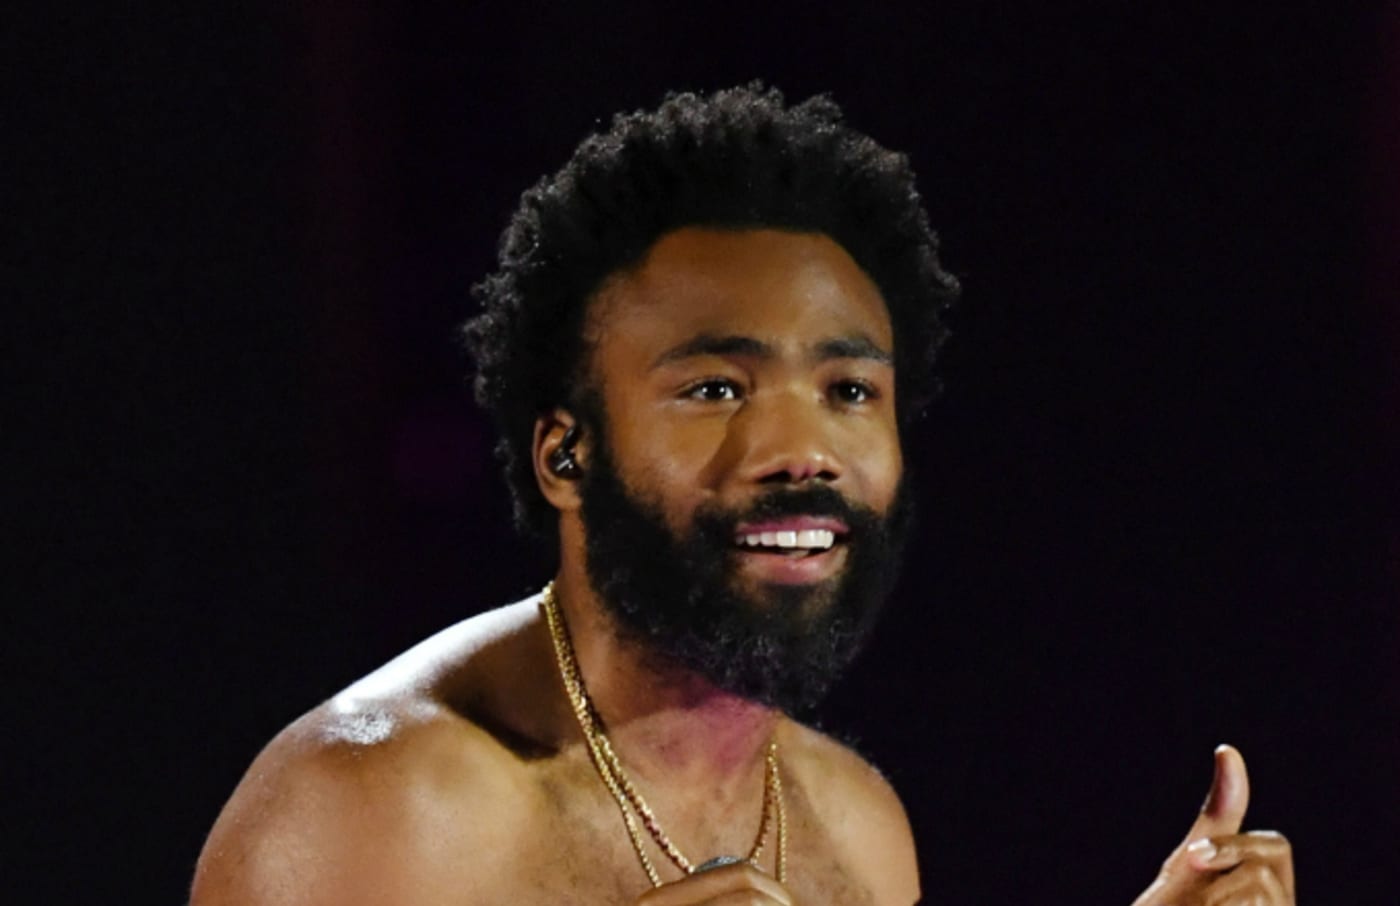 Actor/comedian Donald Glover